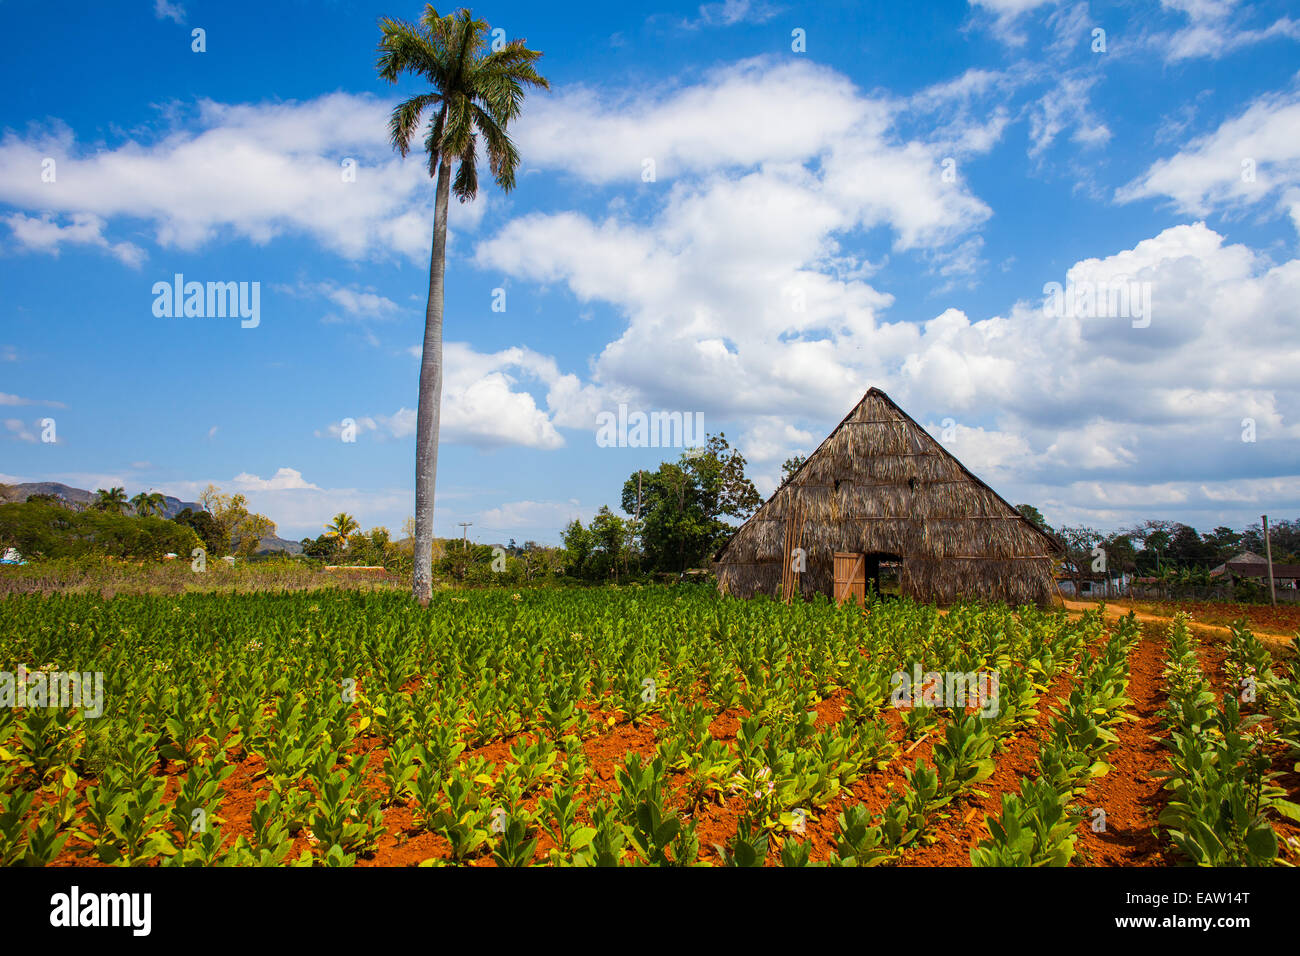 Drying shed and tobacco plantation in Vinales Cuba Stock Photo